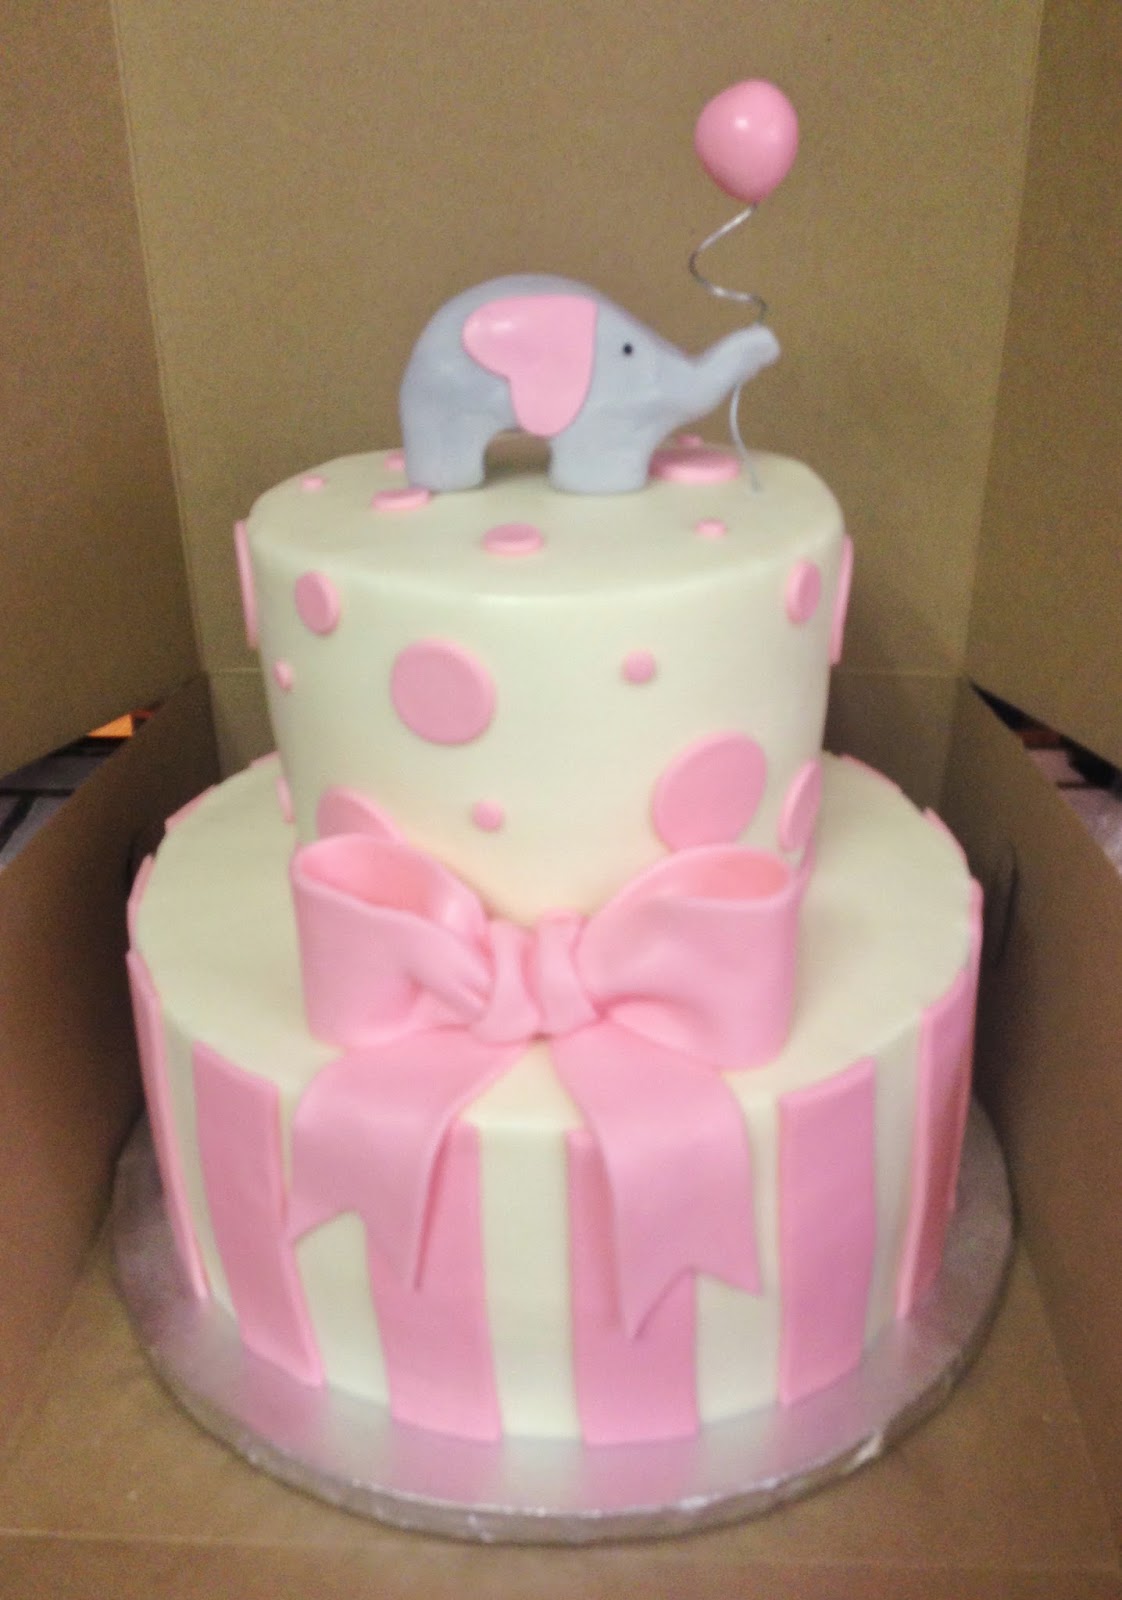 Cakes by Mindy: Pink & White Elephant Baby Shower Cake 6" & 10"